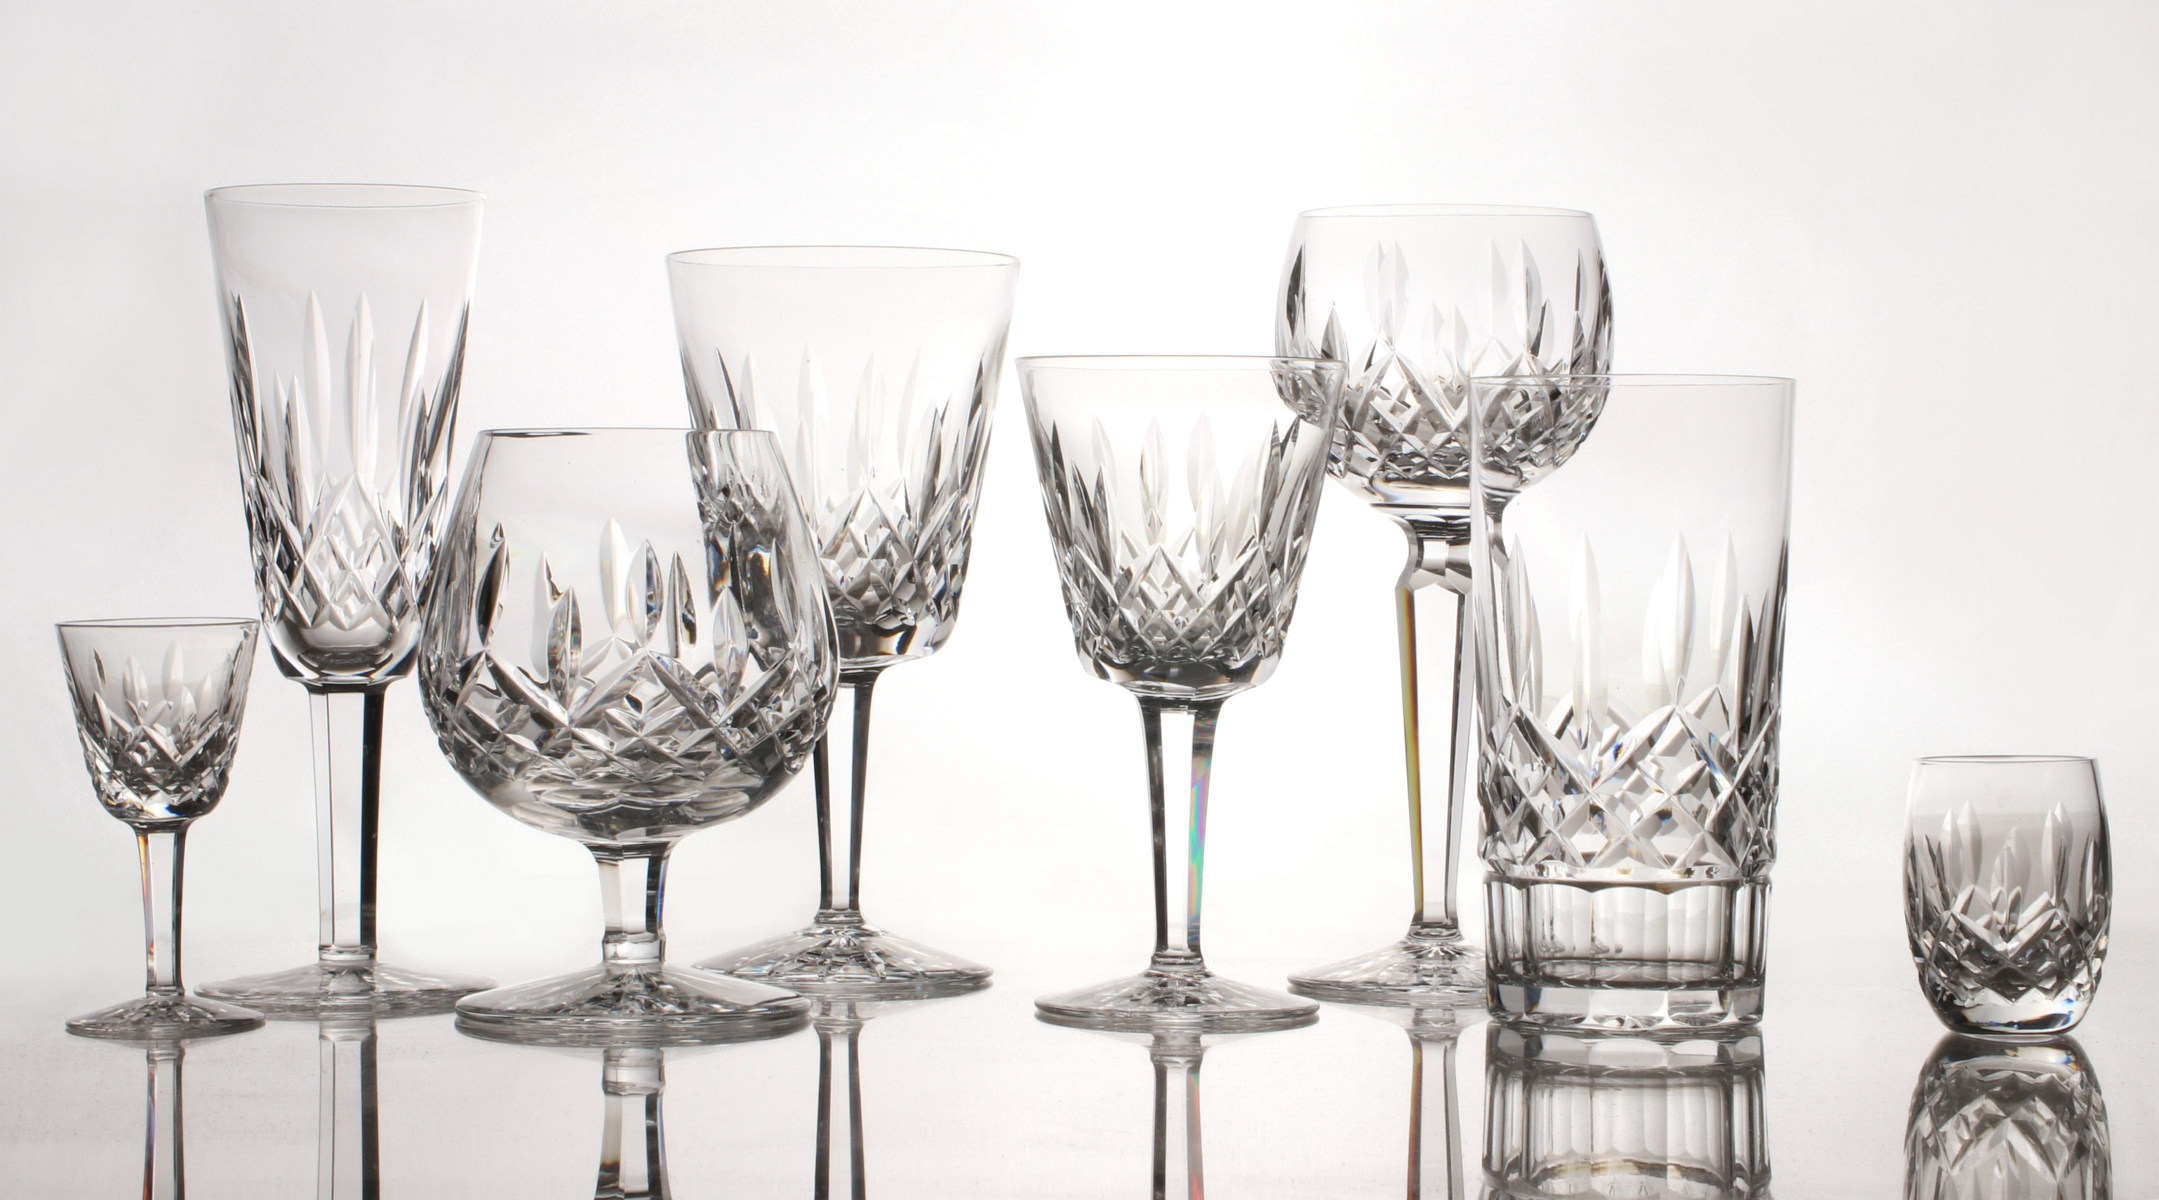 A 43 PIECE SERVICE OF WATERFORD 'LISMORE' IRISH CRYSTAL